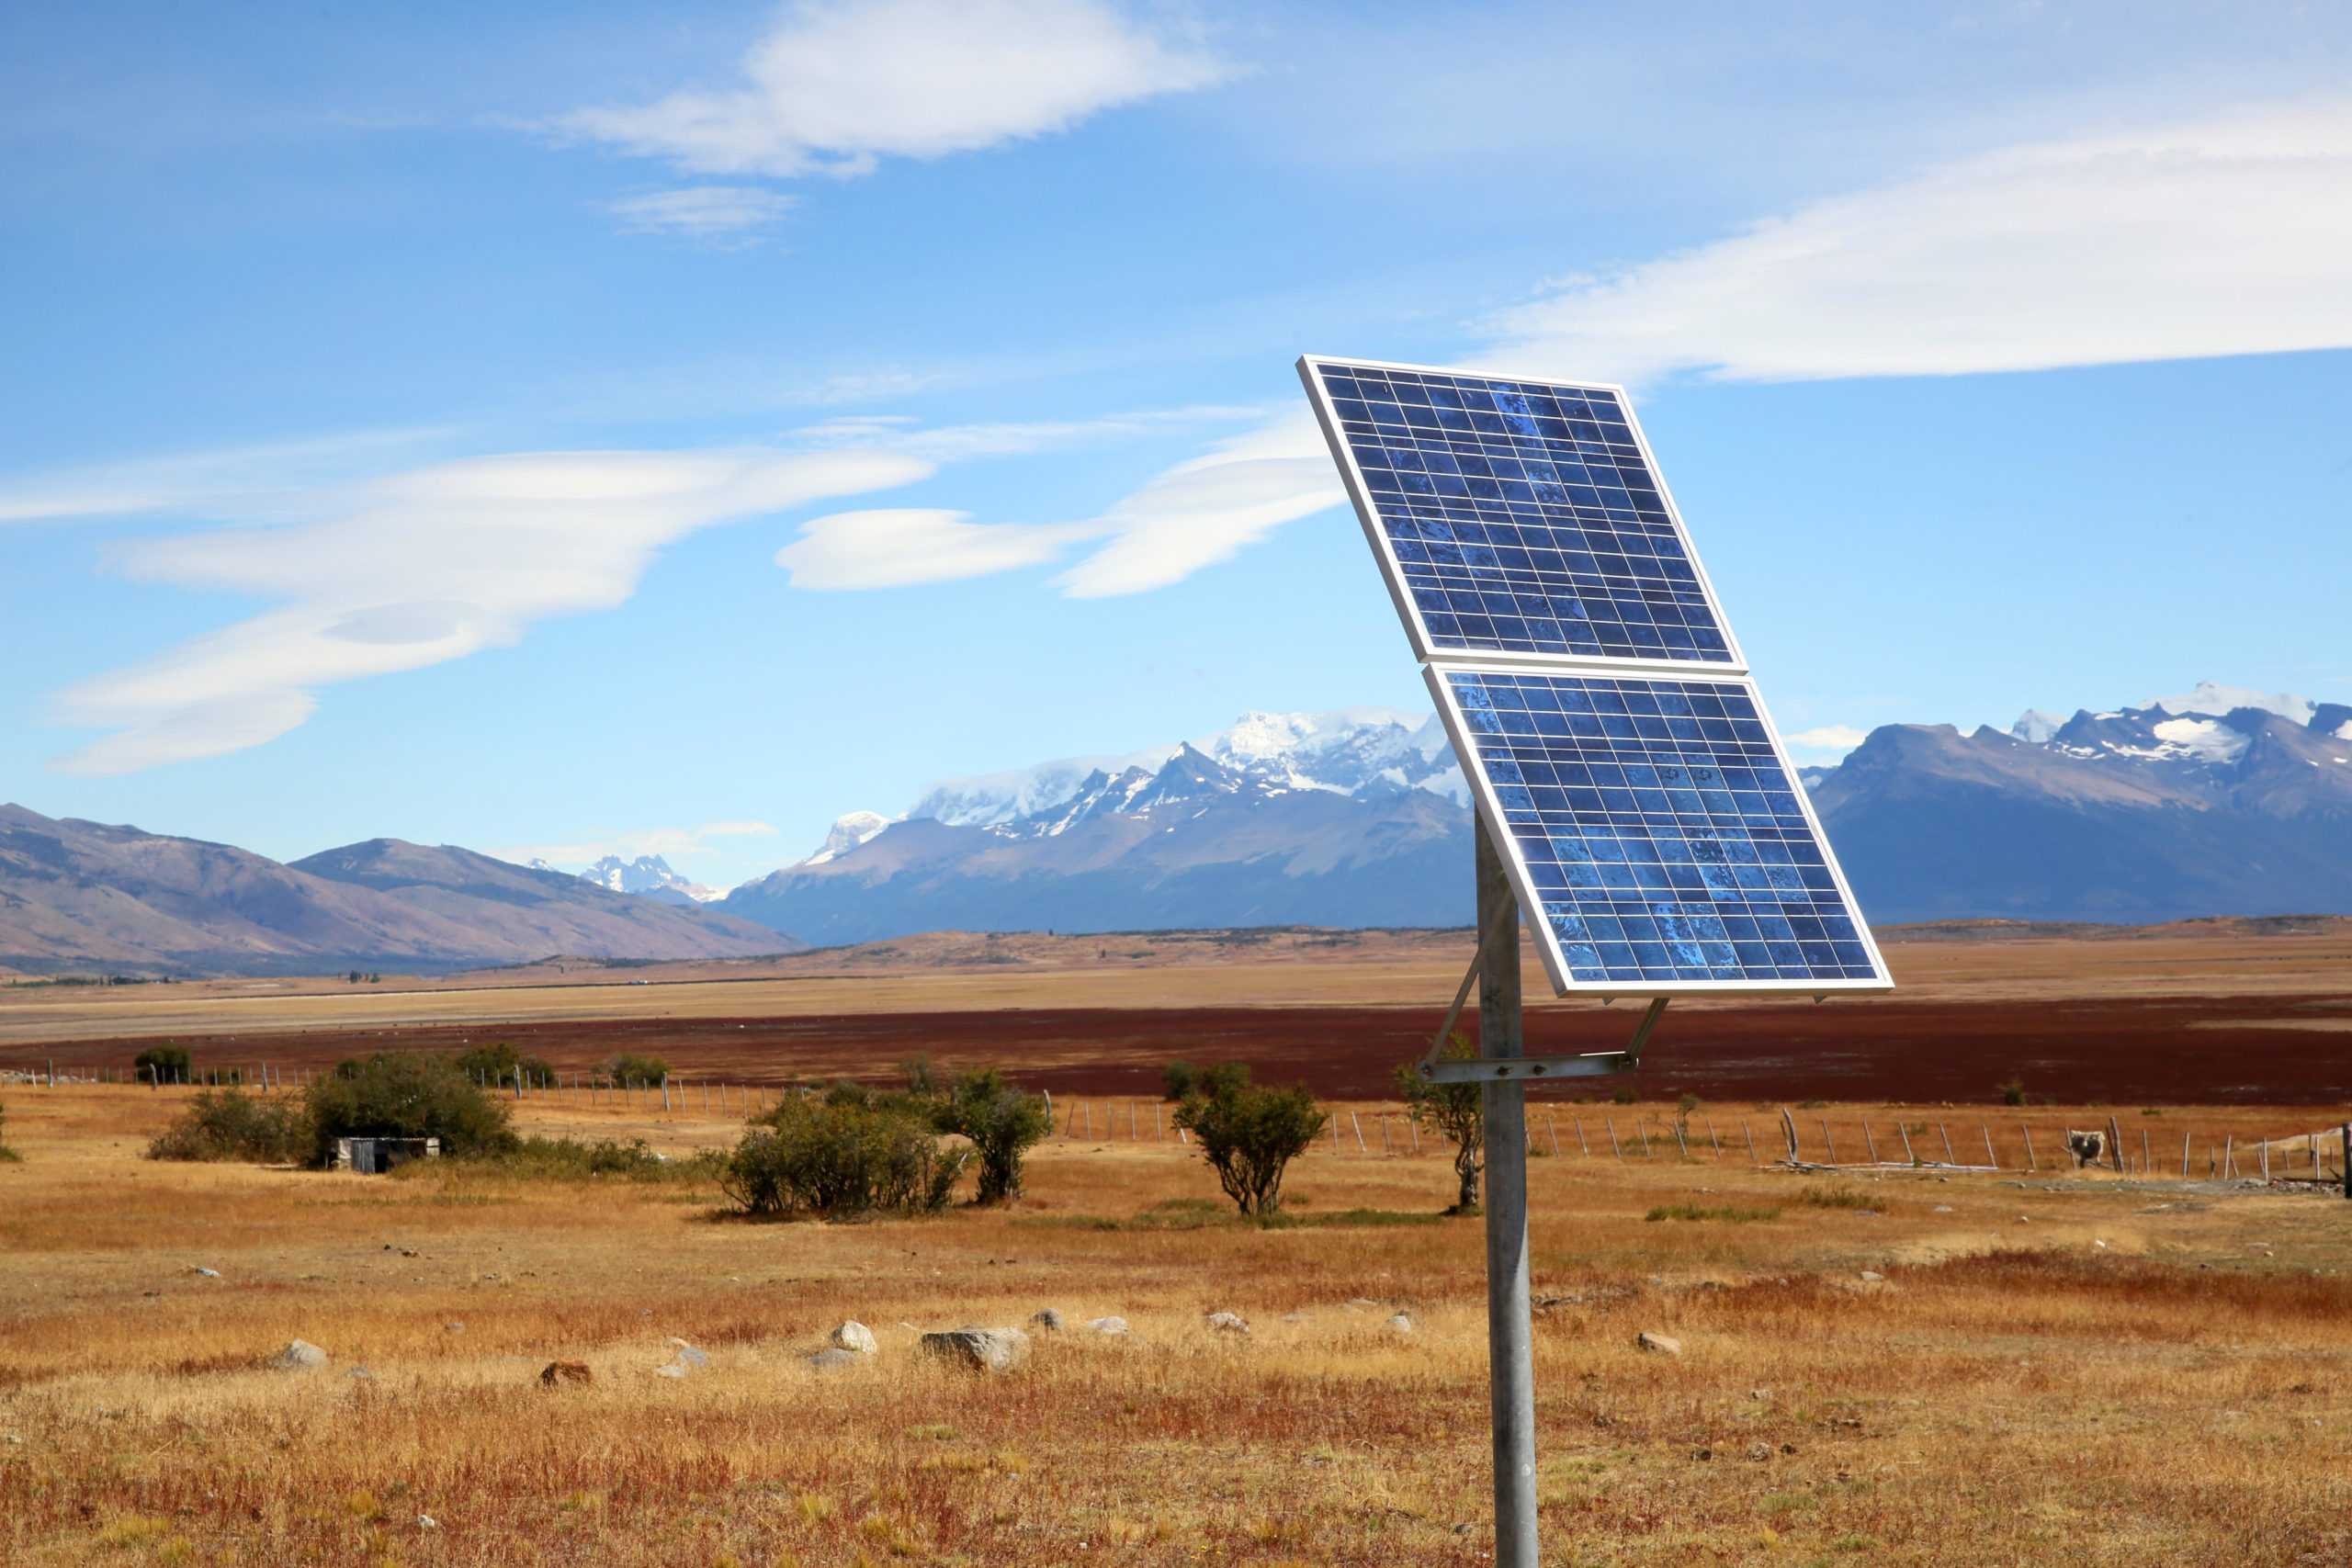 solar panel on metal pole in steppe